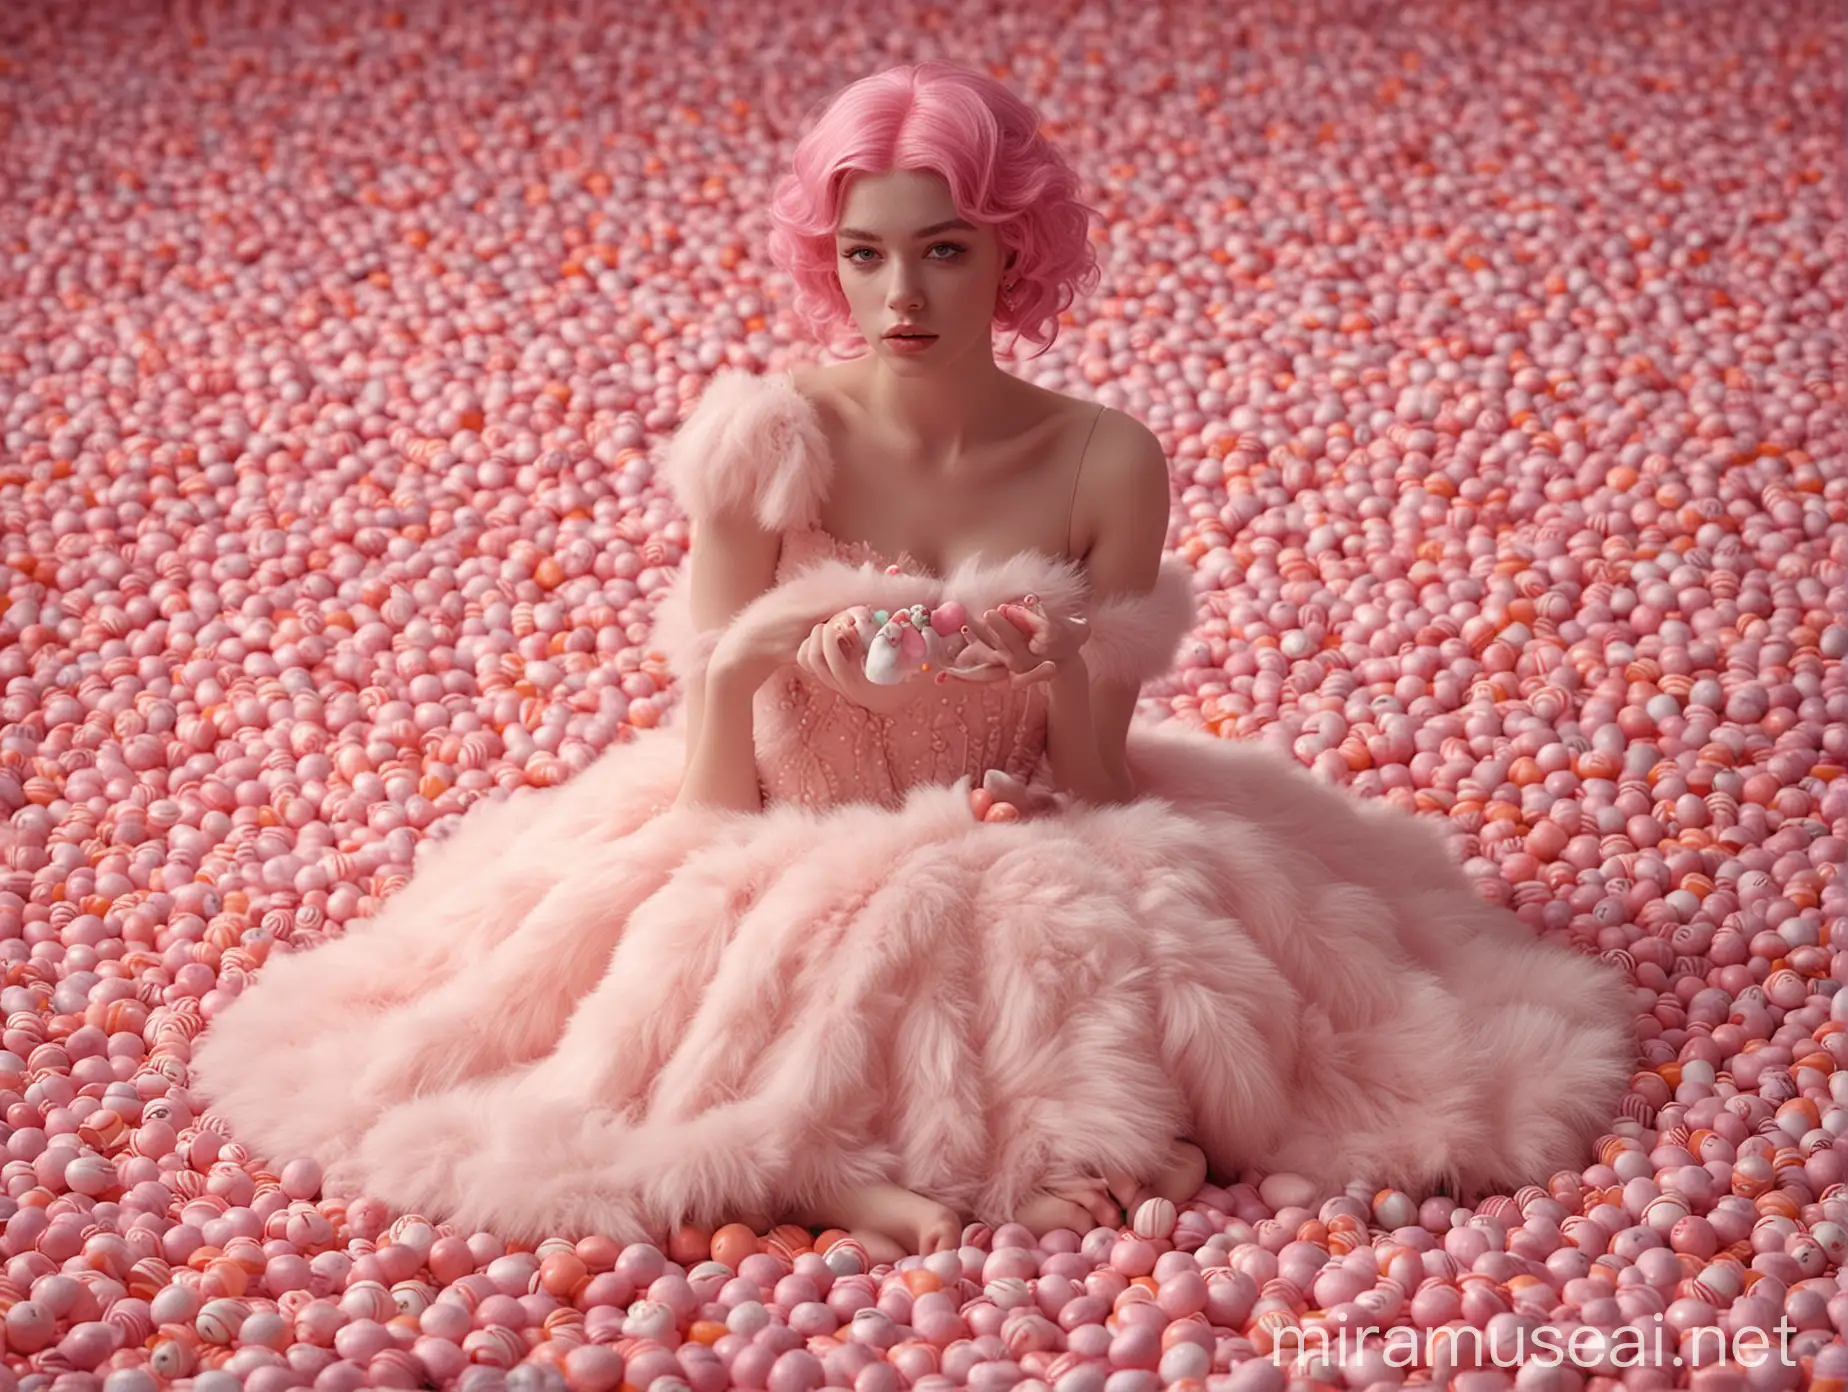 Create sculpture of a pink-haired woman, surrounded by candy. The woman must be sitting in a field of cream. Haute couture, old photography, cinematic, soft fur. The character must be wearing a candy-colored dress and accessories such as chubbies or skittles. Sweet concept, cinematics, soft fur, extremely detailed.